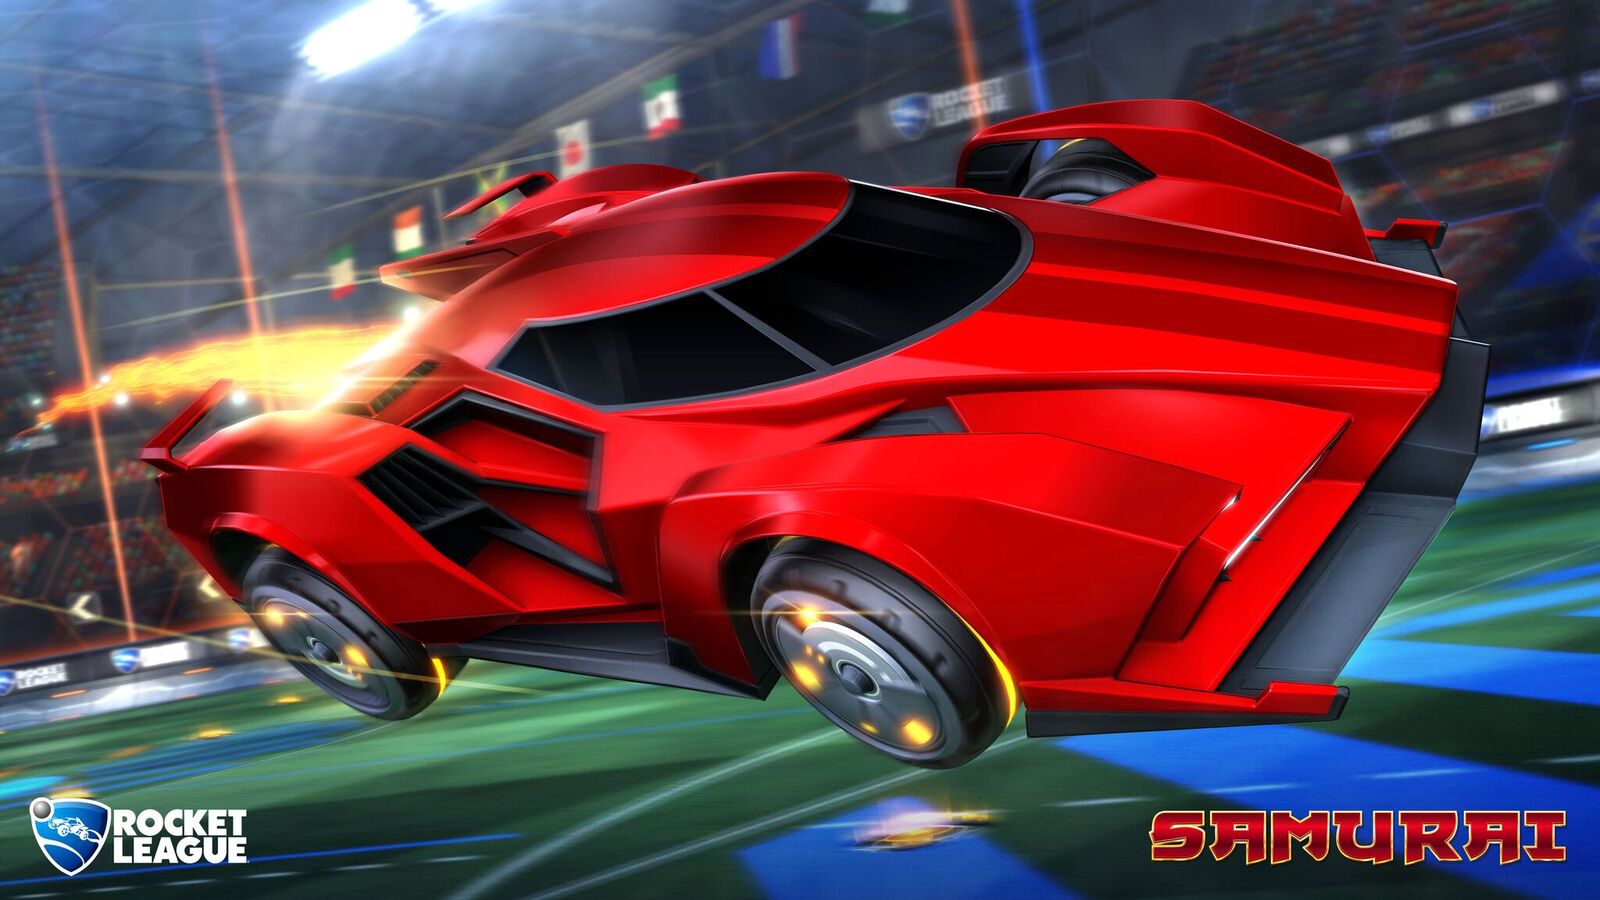 Tournaments update for Rocket League is now available.